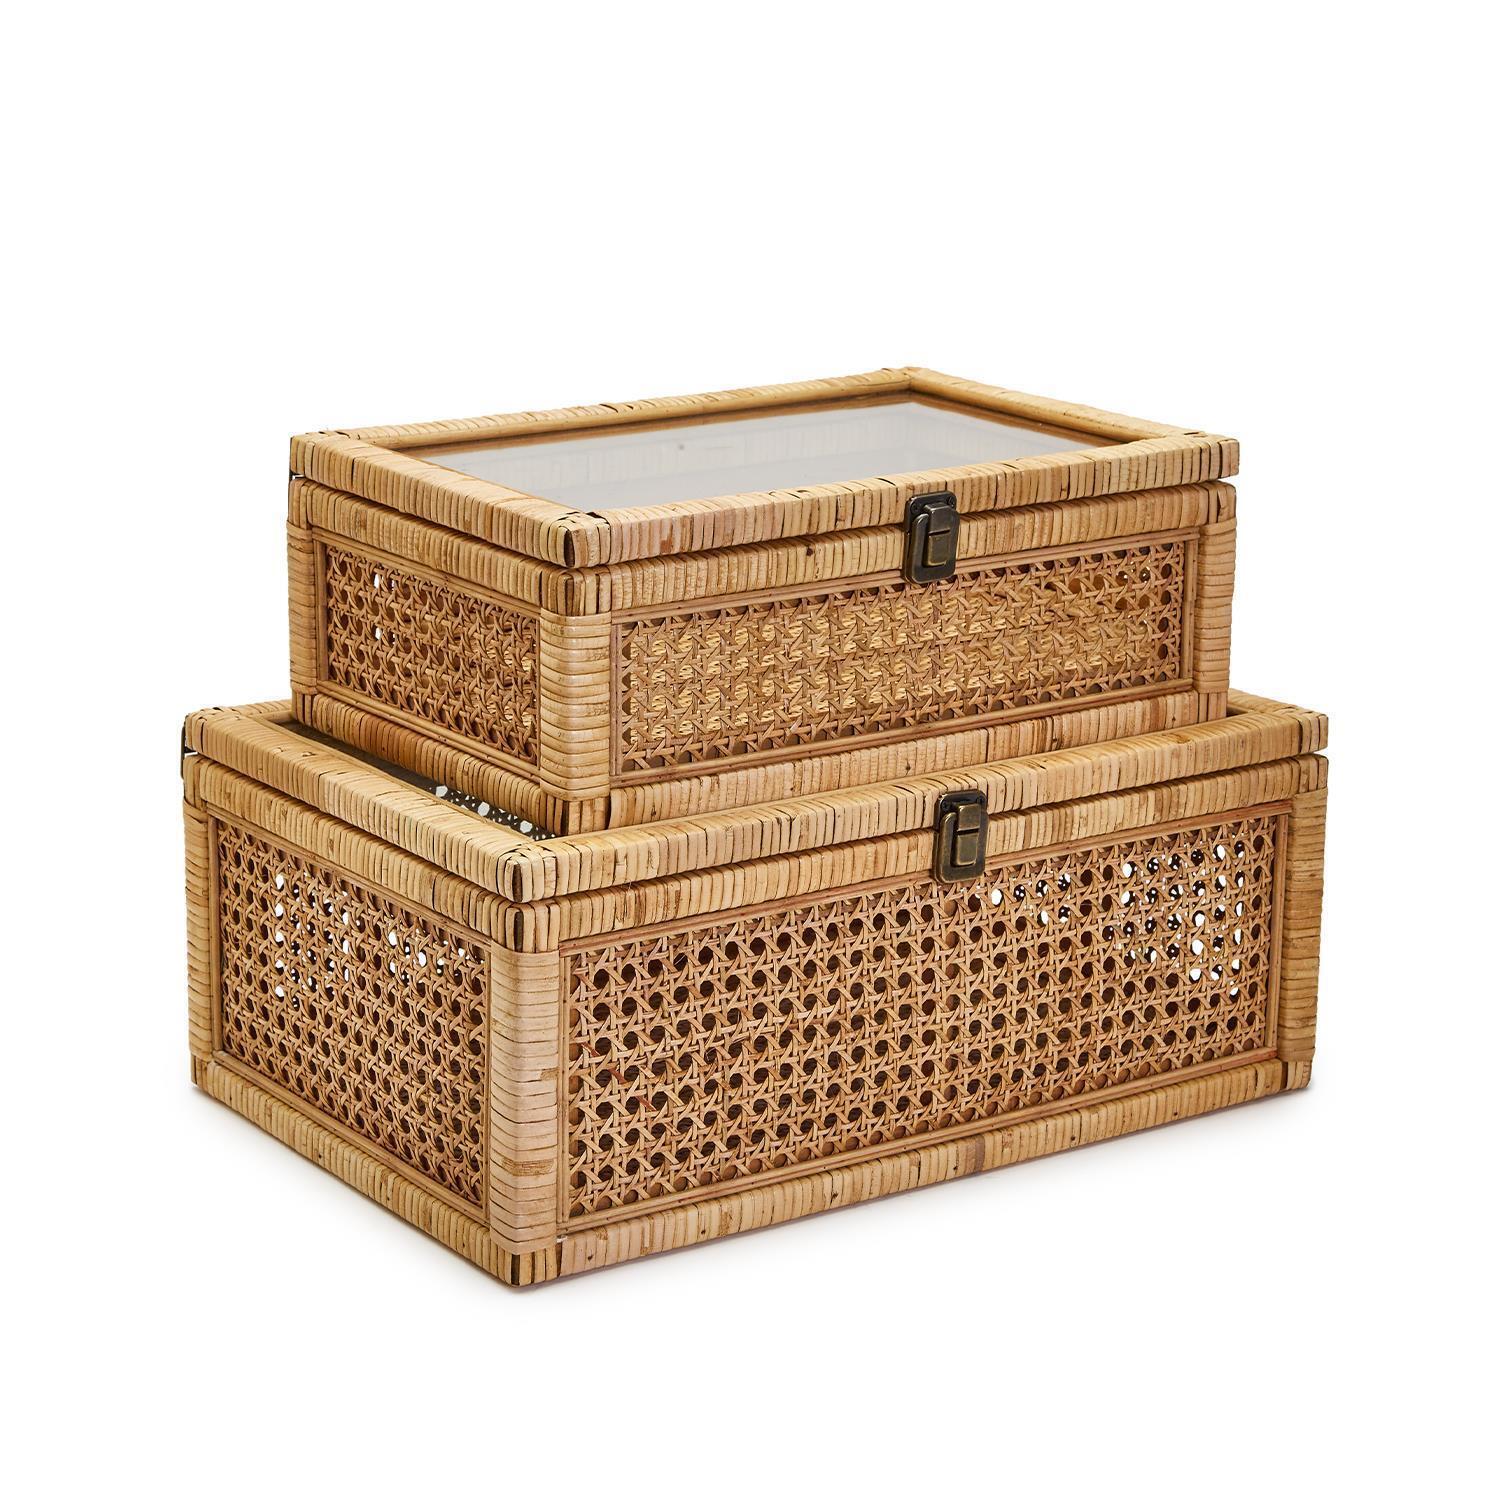 Two\'s Company Set of 2 Rattan Decorative Storage Boxes Includes 2 Sizes.